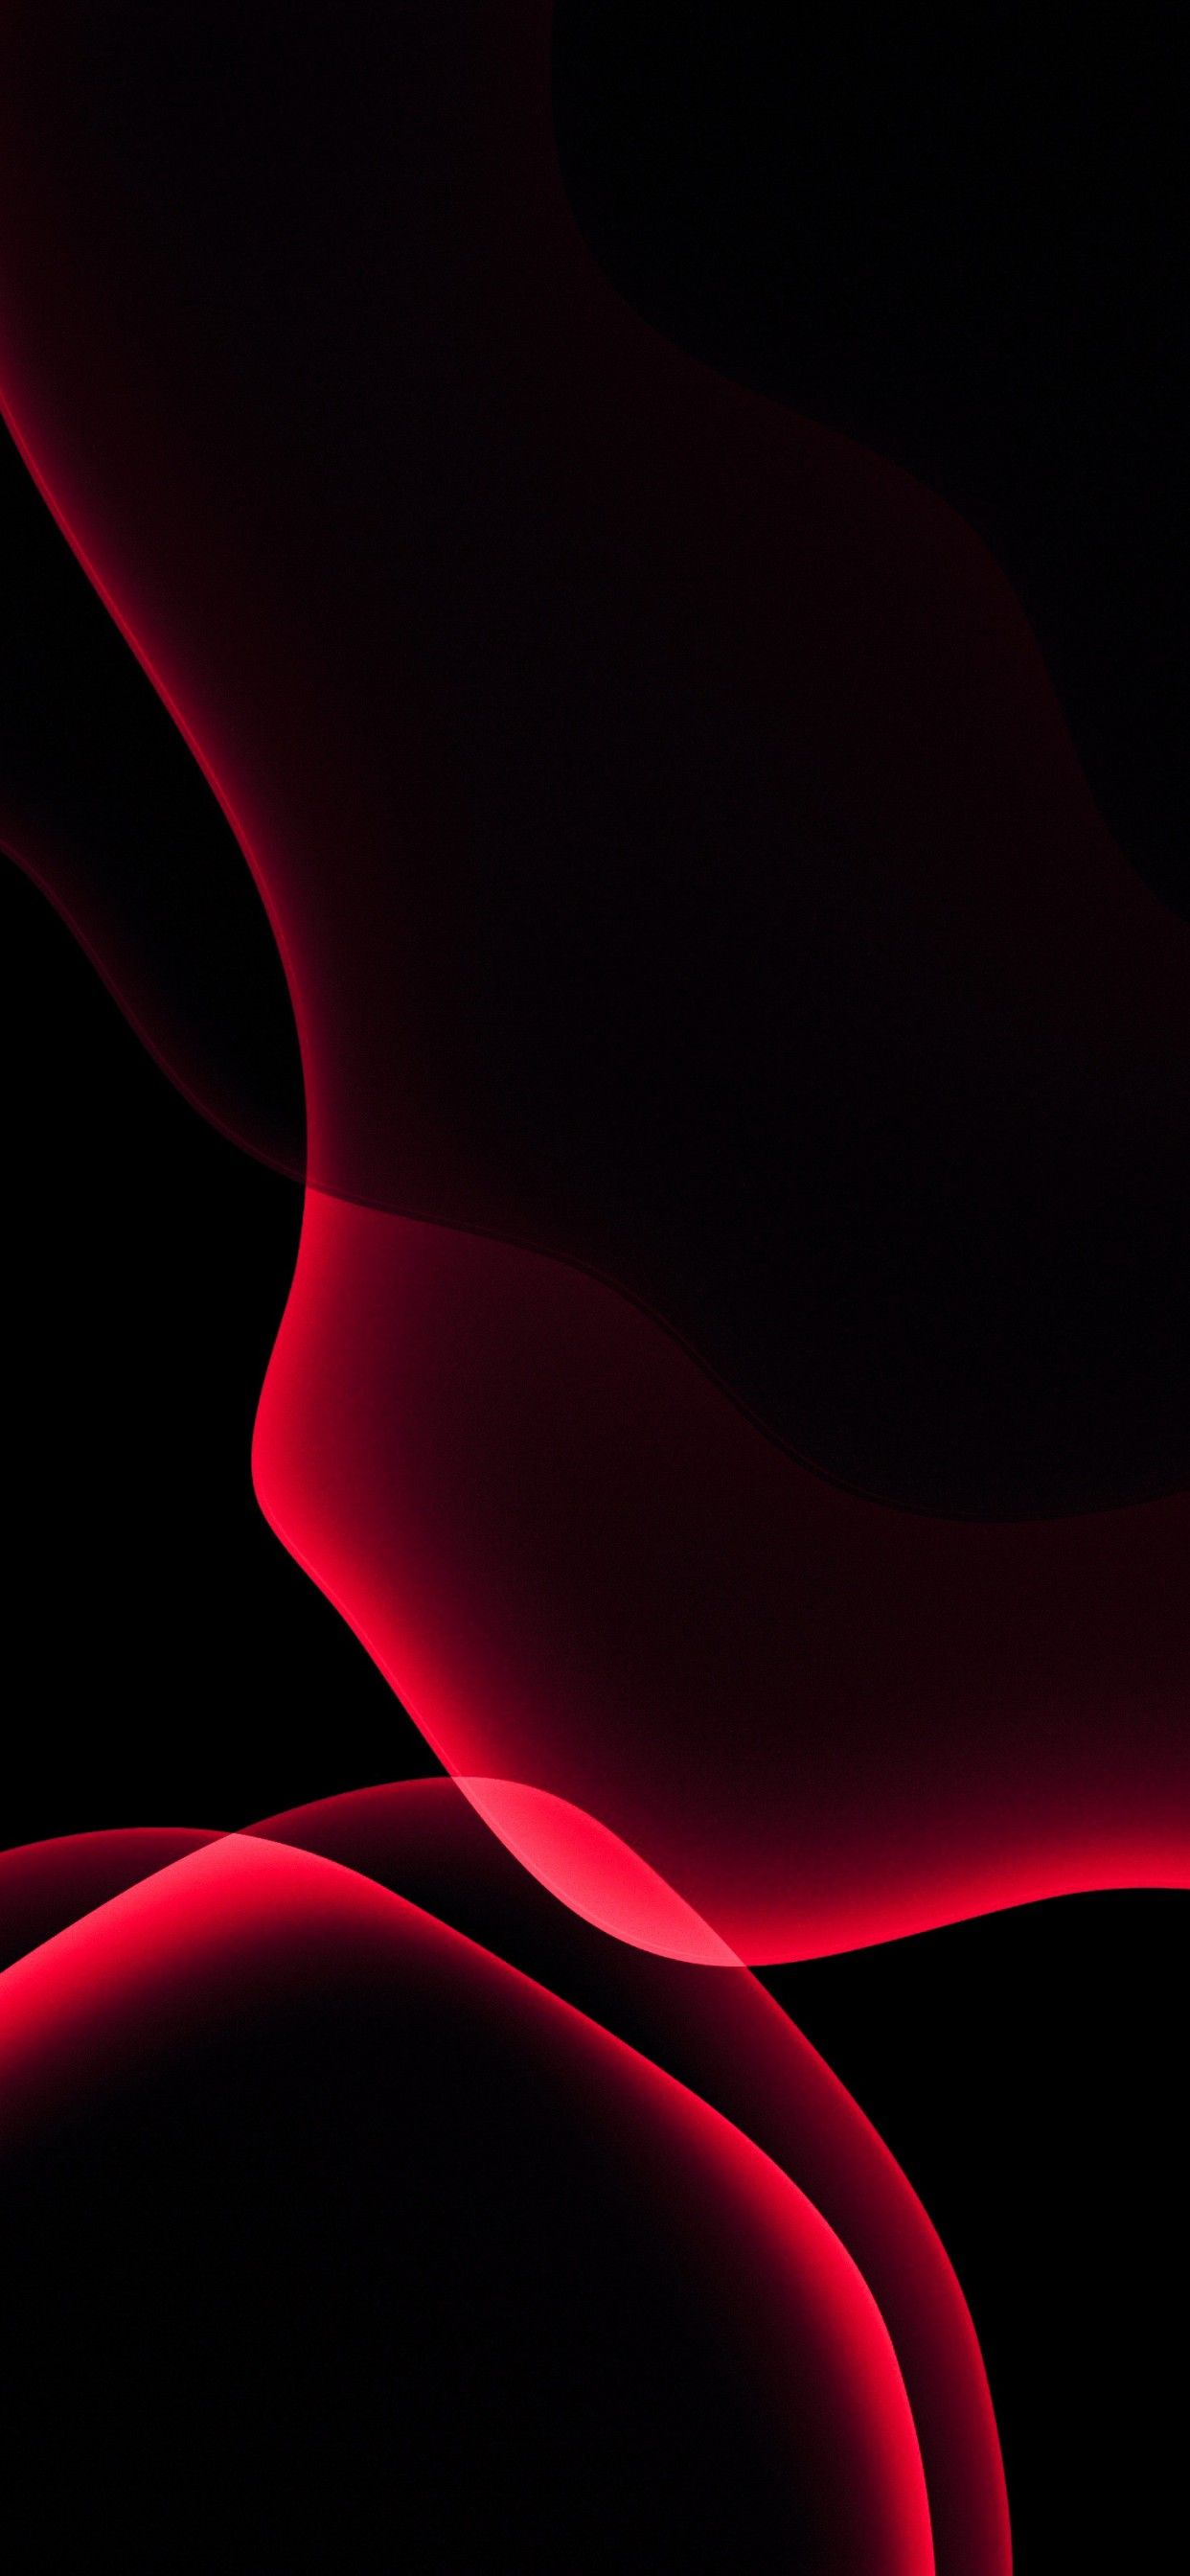 iOS 13 4K Wallpaper, Stock, iPadOS, Red, Black background, AMOLED, HD, Abstract